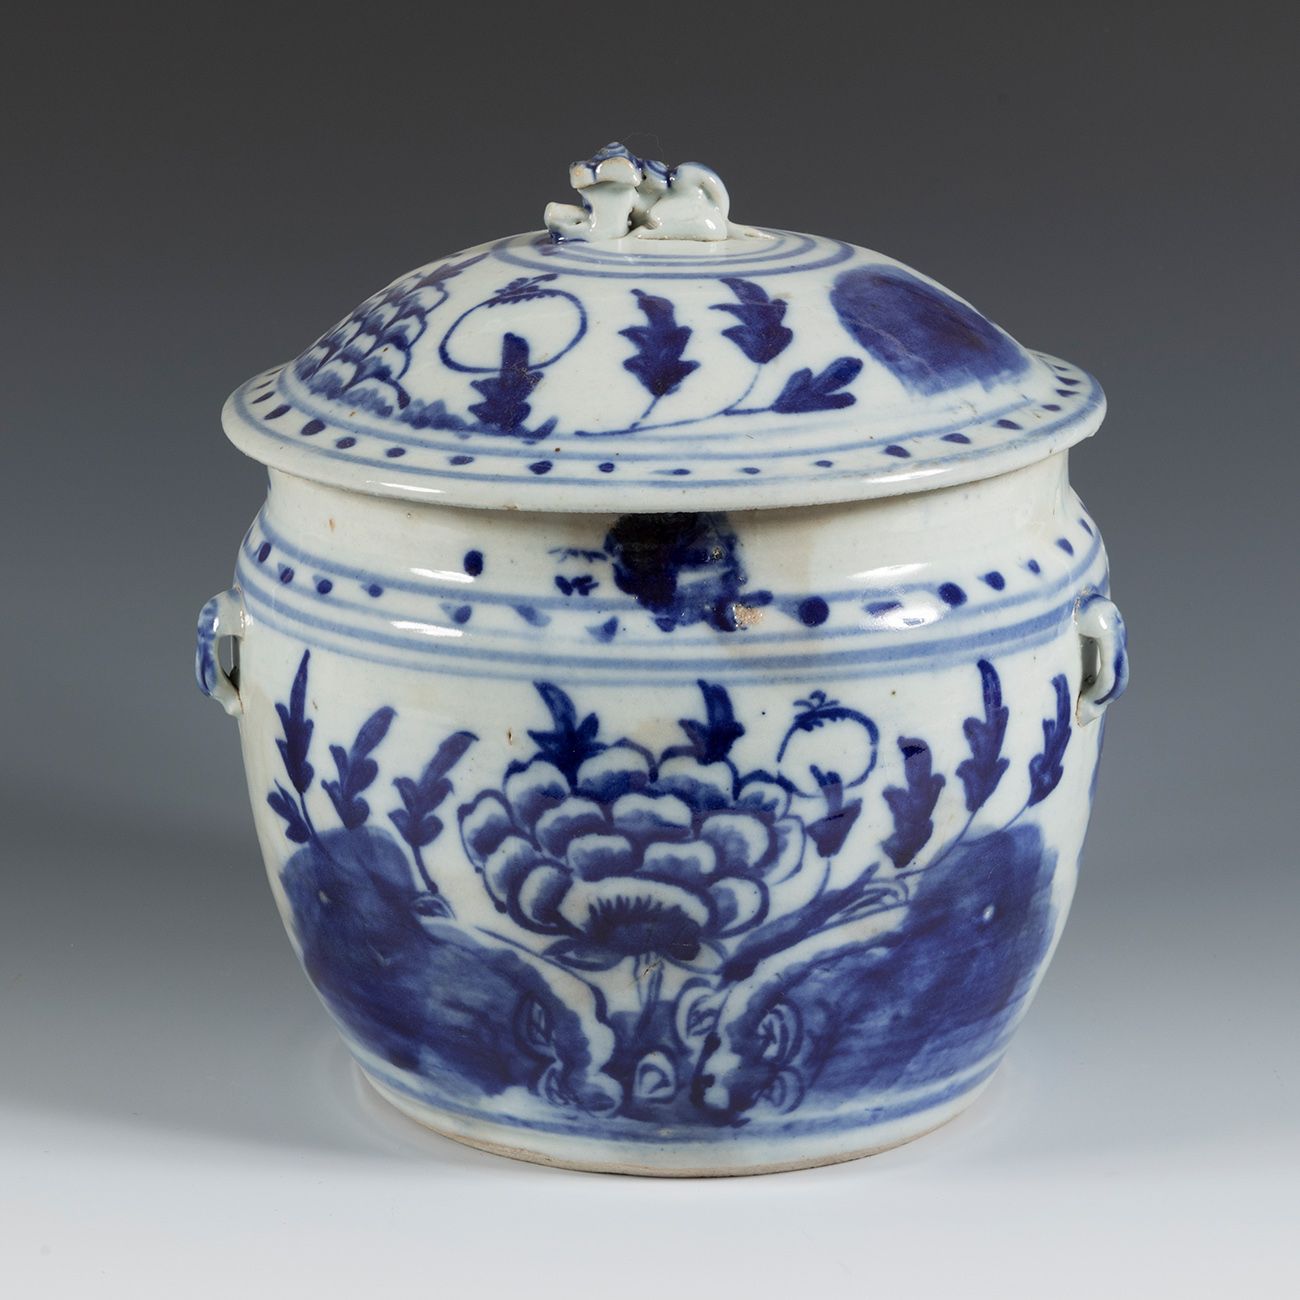 Null Tureen. China, 19th century.
Blue and white porcelain.
With inscription.
Wi&hellip;